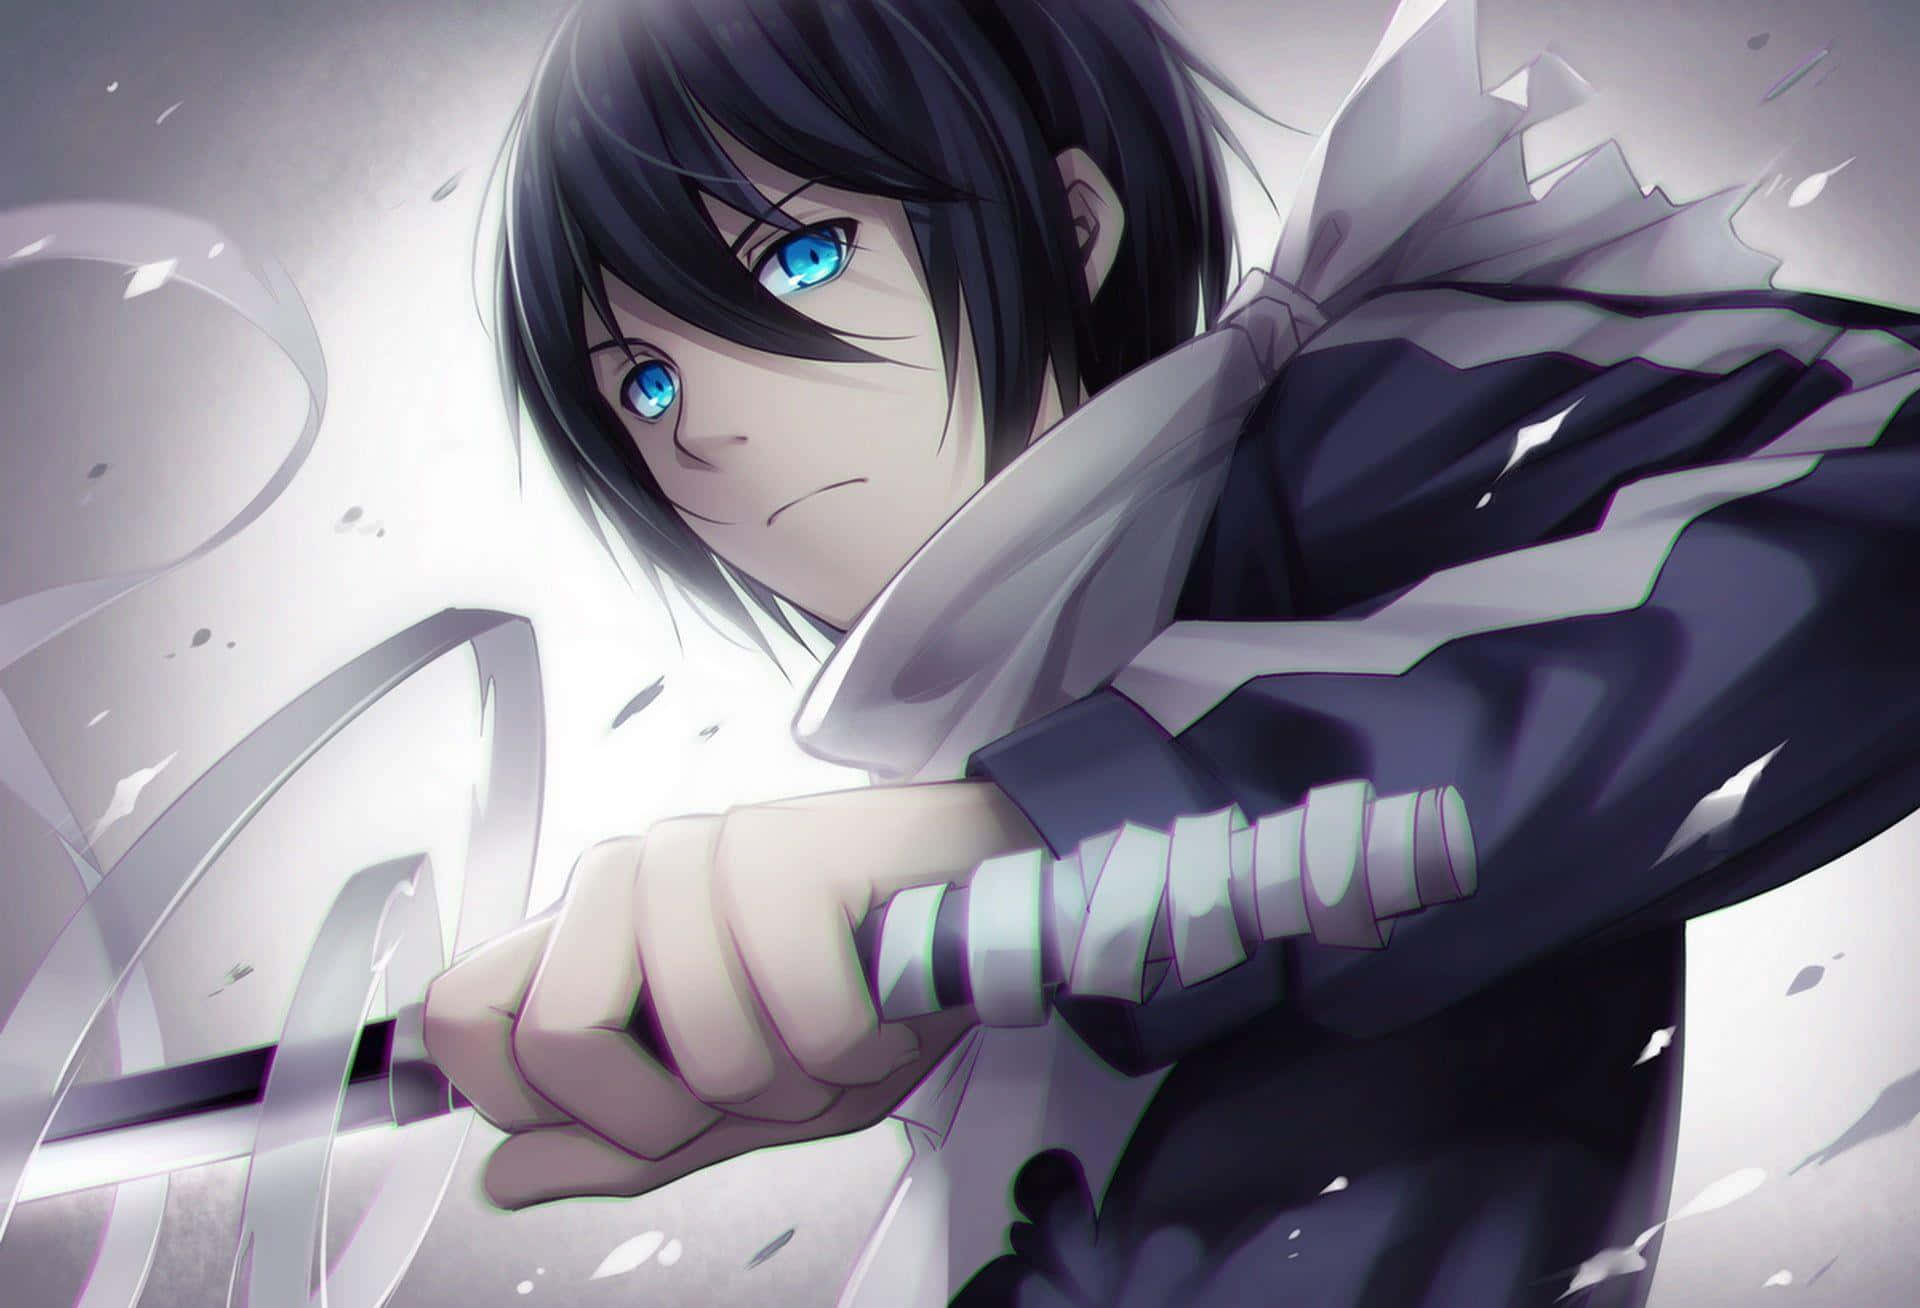 Free Male Anime Characters Wallpaper Downloads, [100+] Male Anime Characters  Wallpapers for FREE 